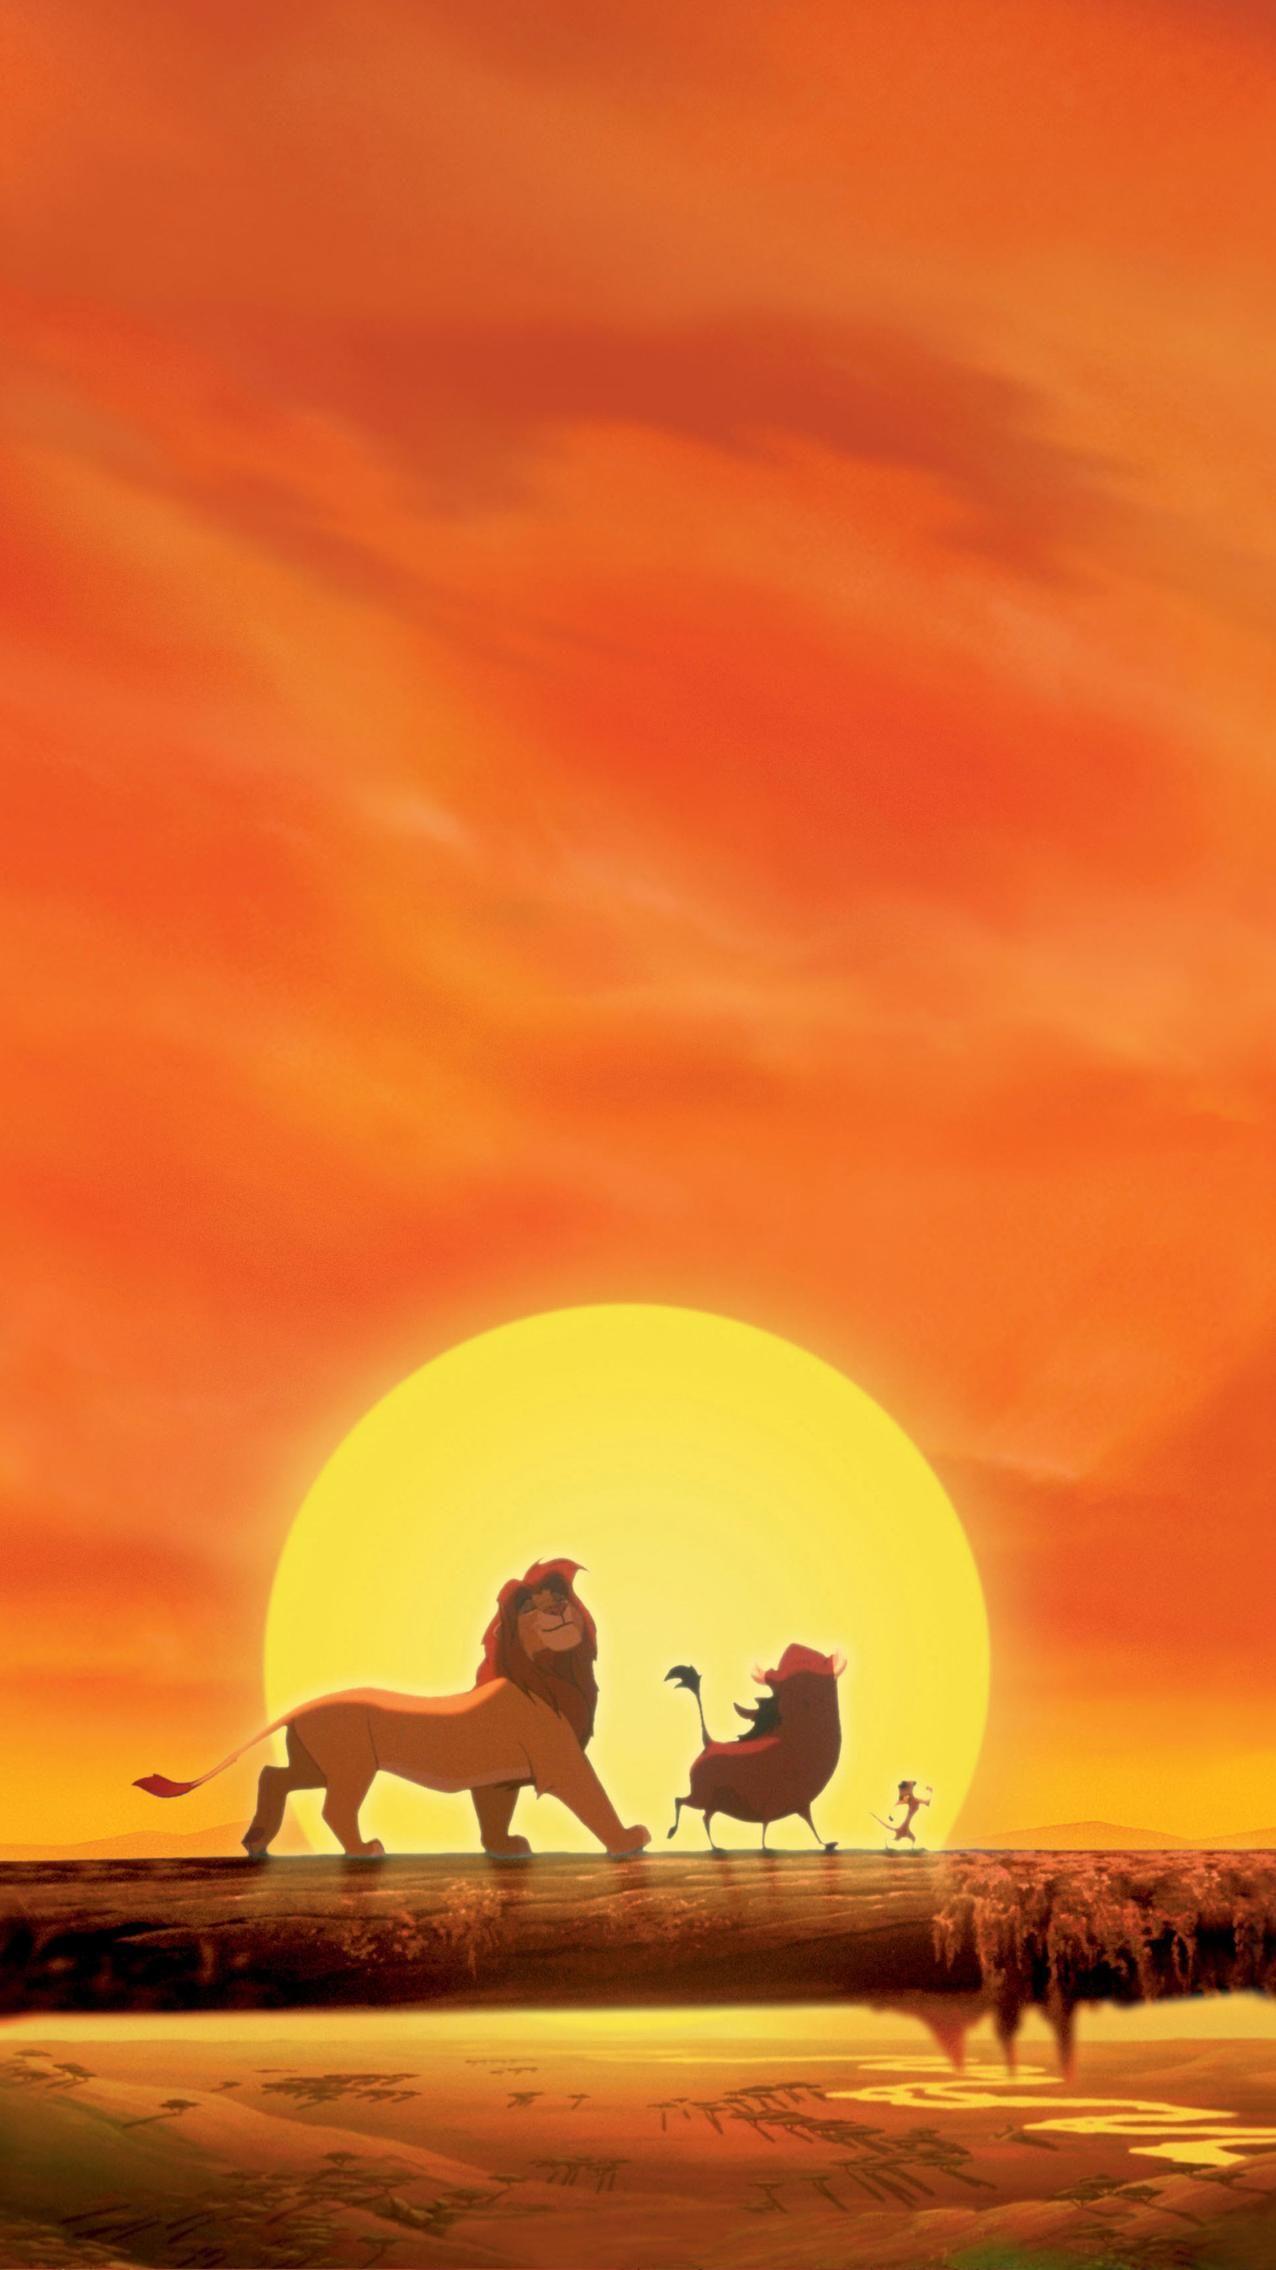 The Lion King 1994 Wallpapers - Wallpaper Cave